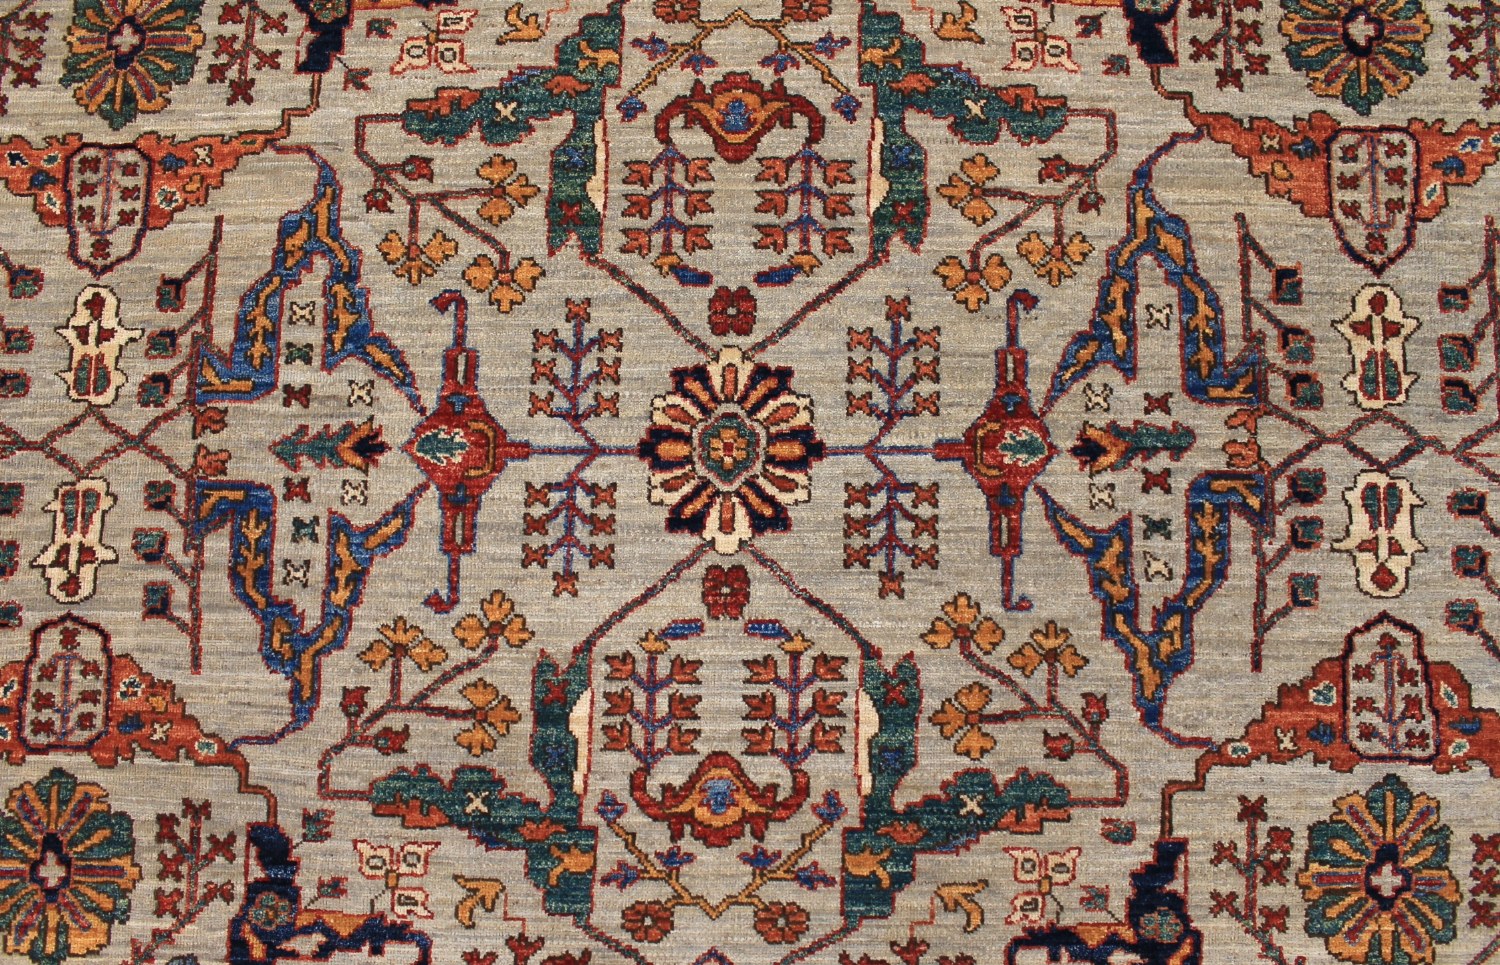 8x10 Aryana & Antique Revivals Hand Knotted Wool Area Rug - MR027817